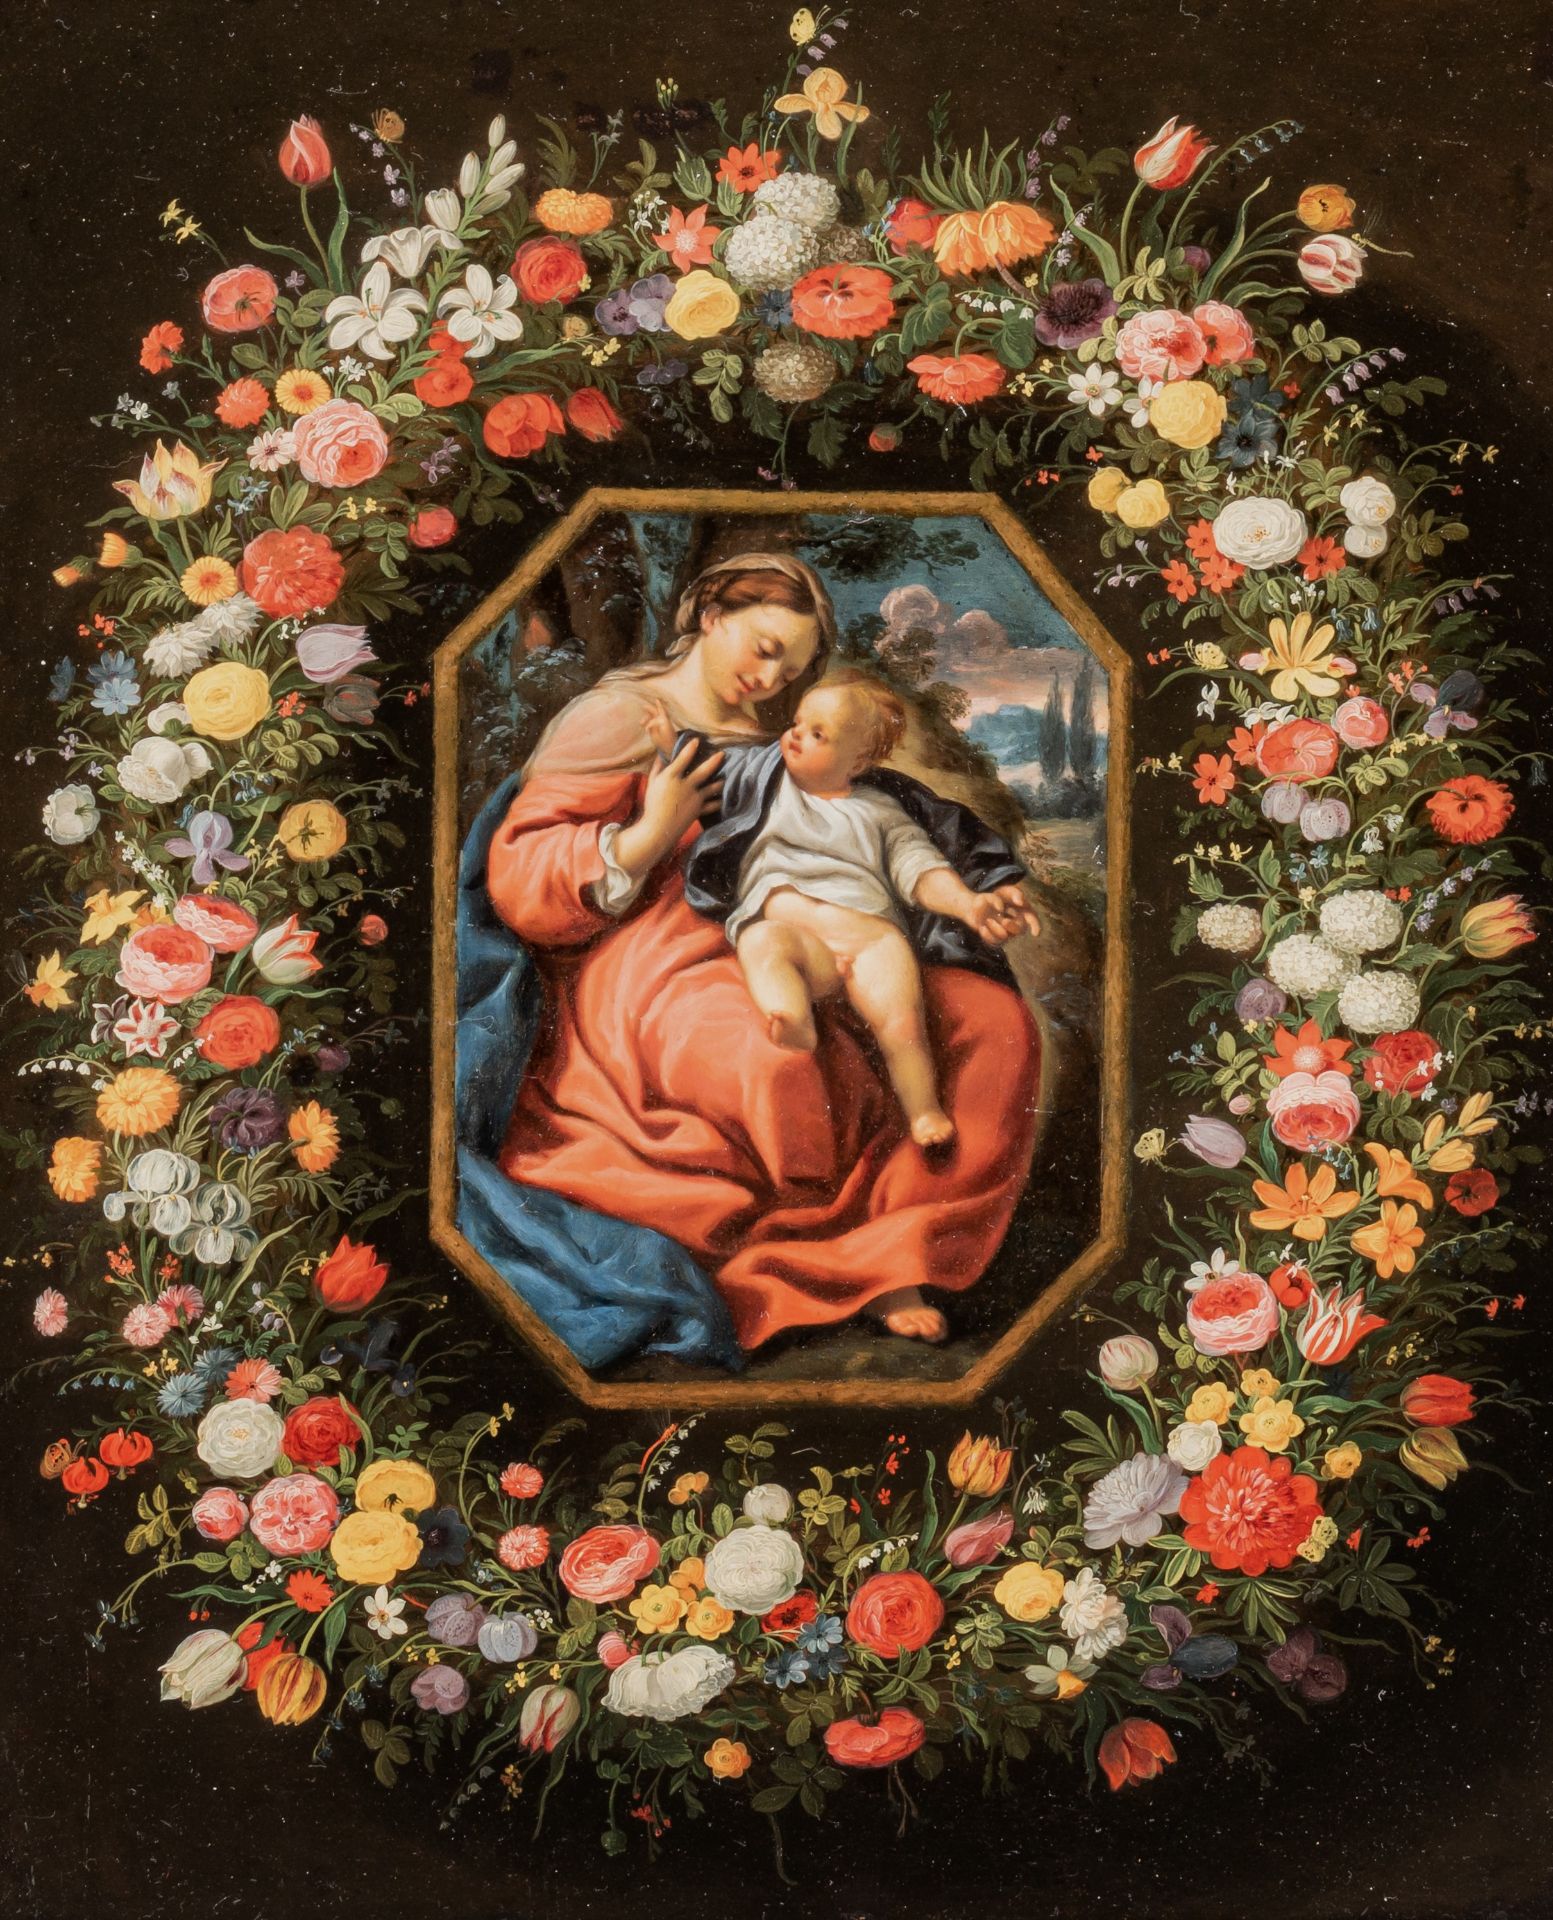 Jan Brueghel the Younger (1601-1678), Madonna with the child Jesus surrounded by a garland of flower